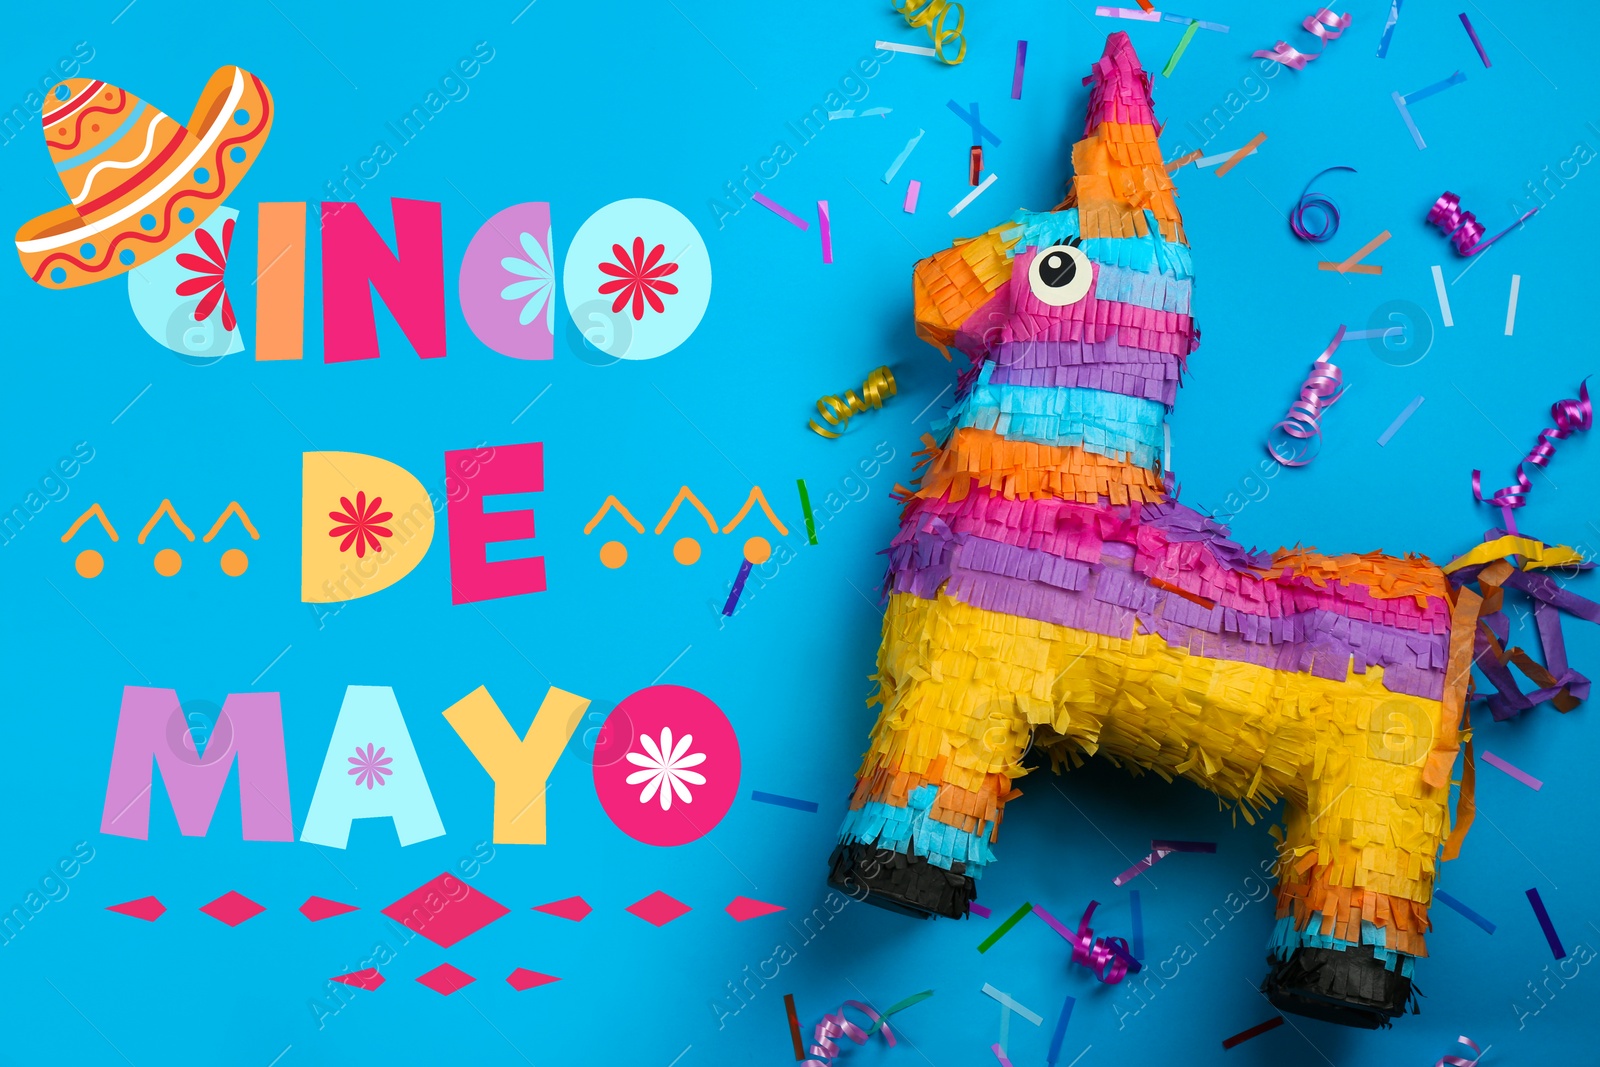 Image of Cinco de Mayo festive poster. Bright funny pinata on blue background, flat lay